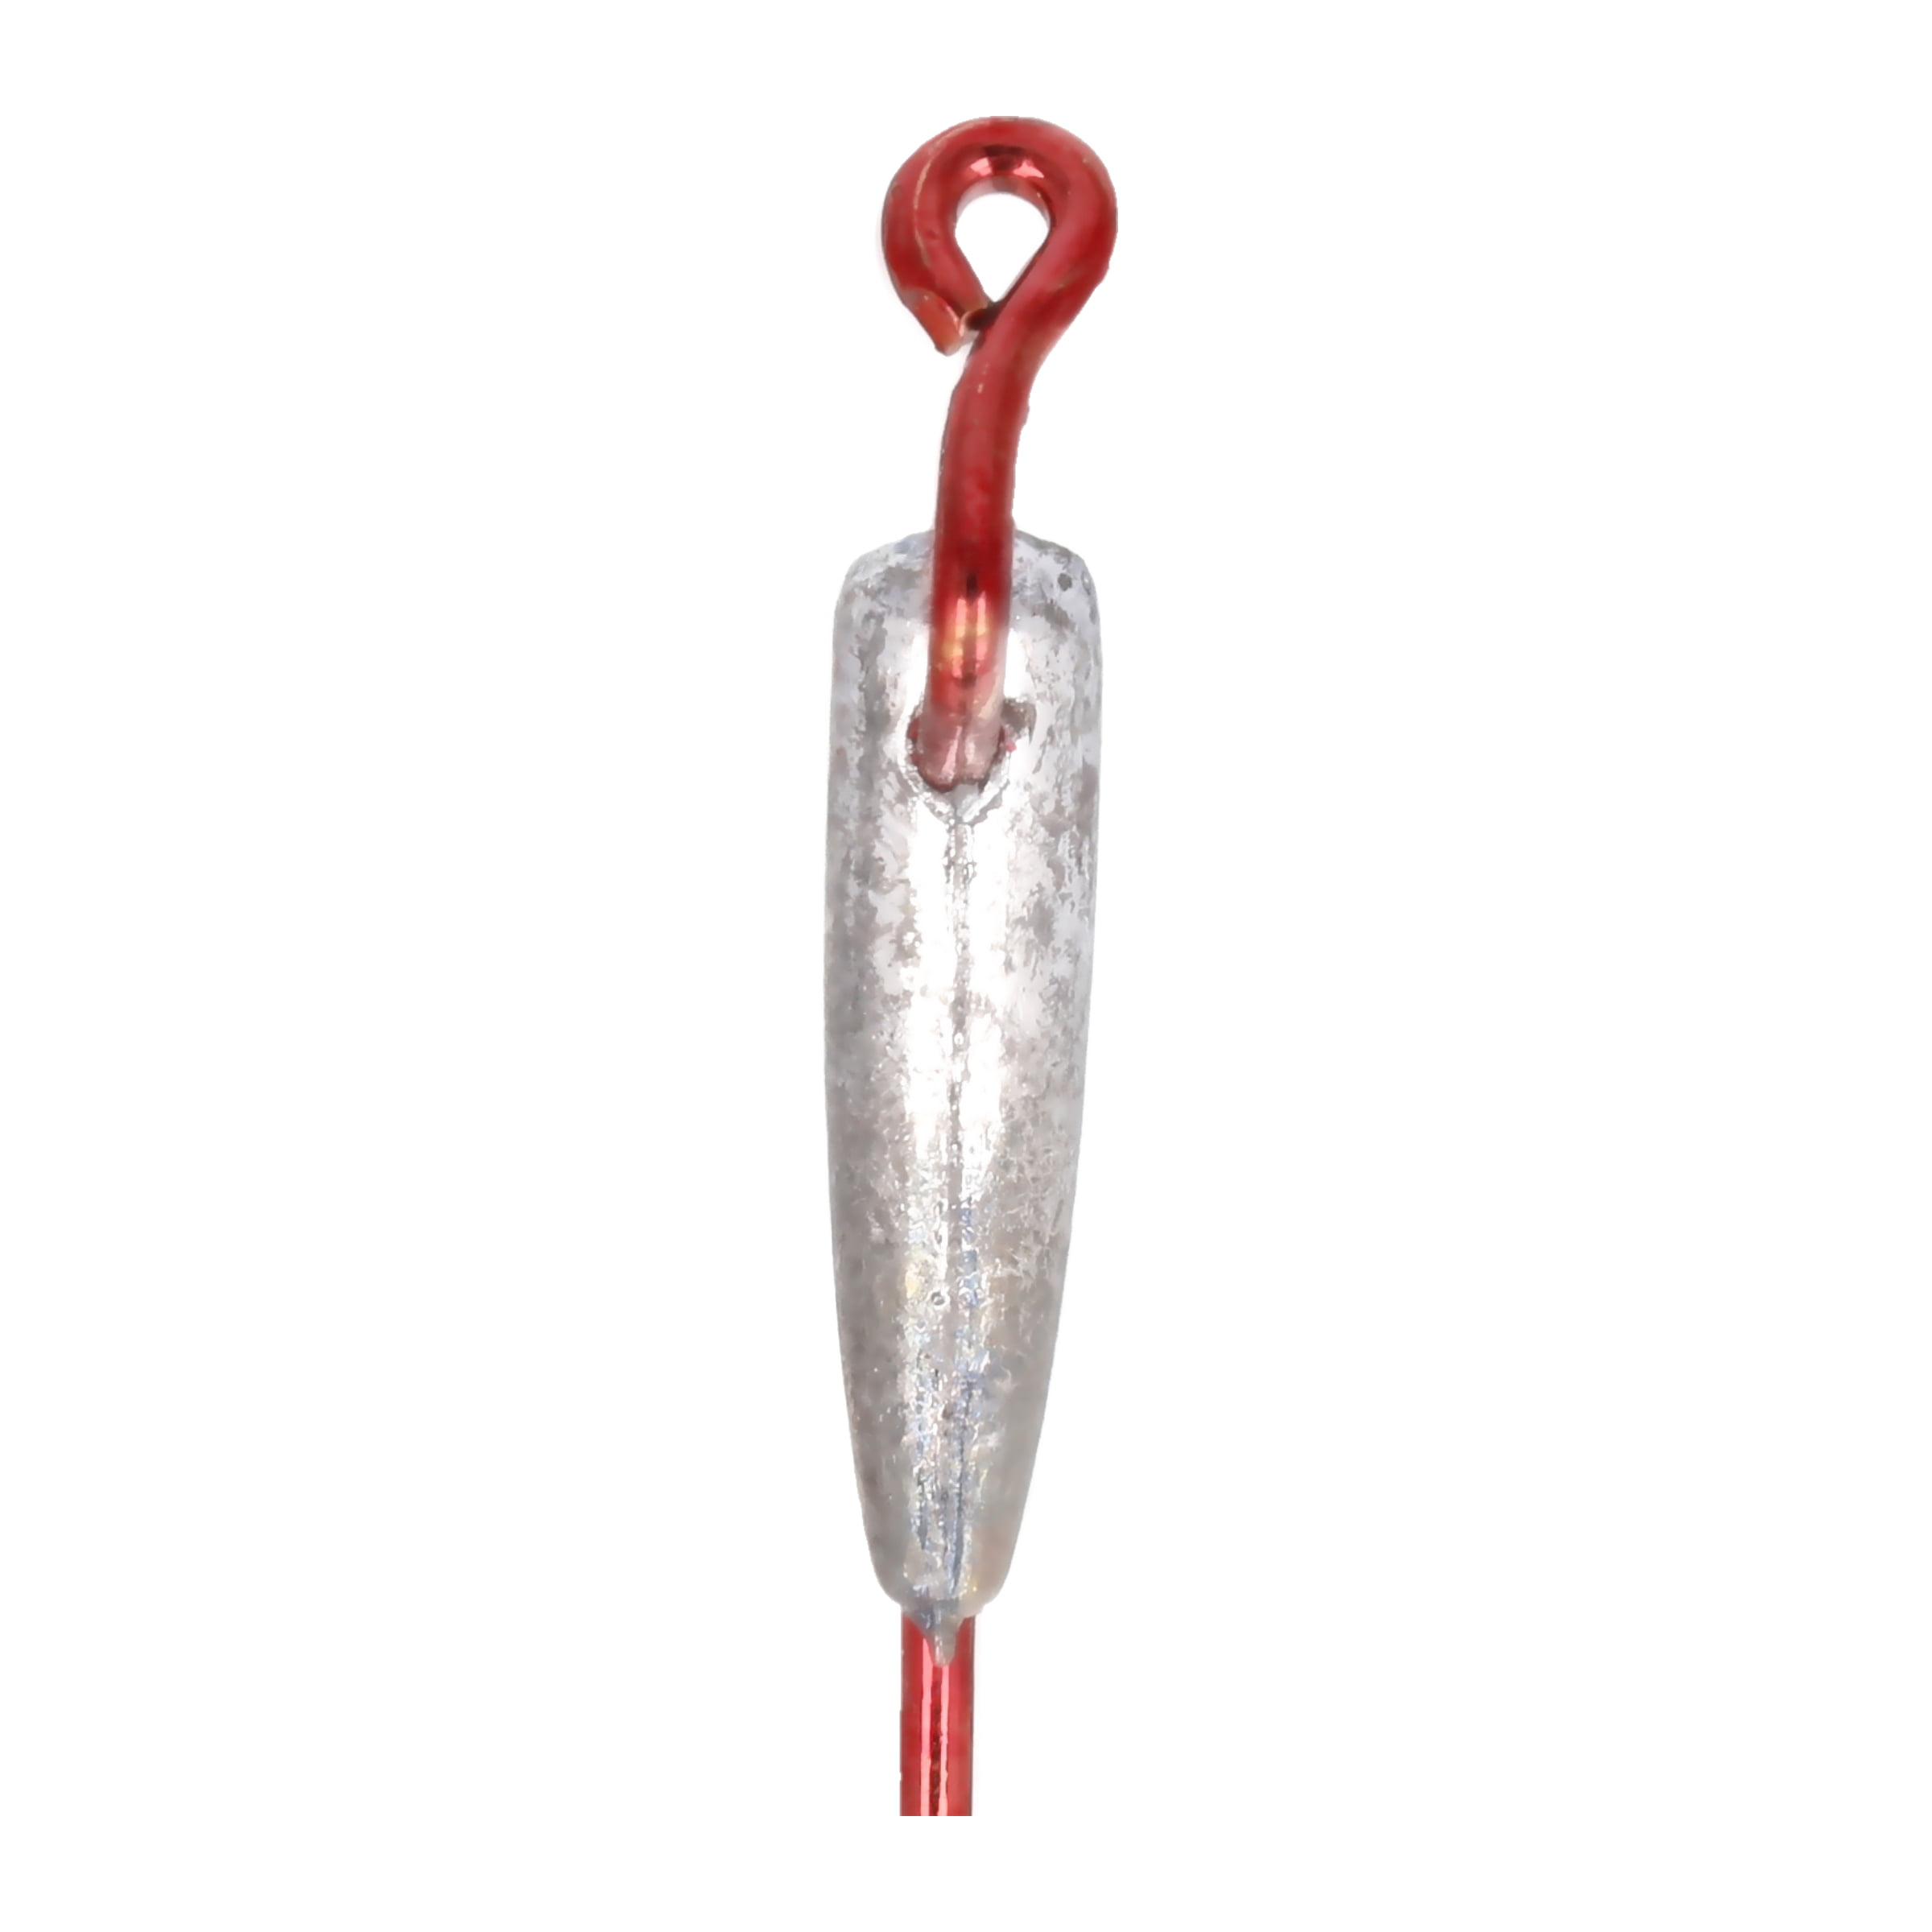 Lazer Sharp Weighted Fishing Hook, Red Hook, 1/32 oz., BWH132-R